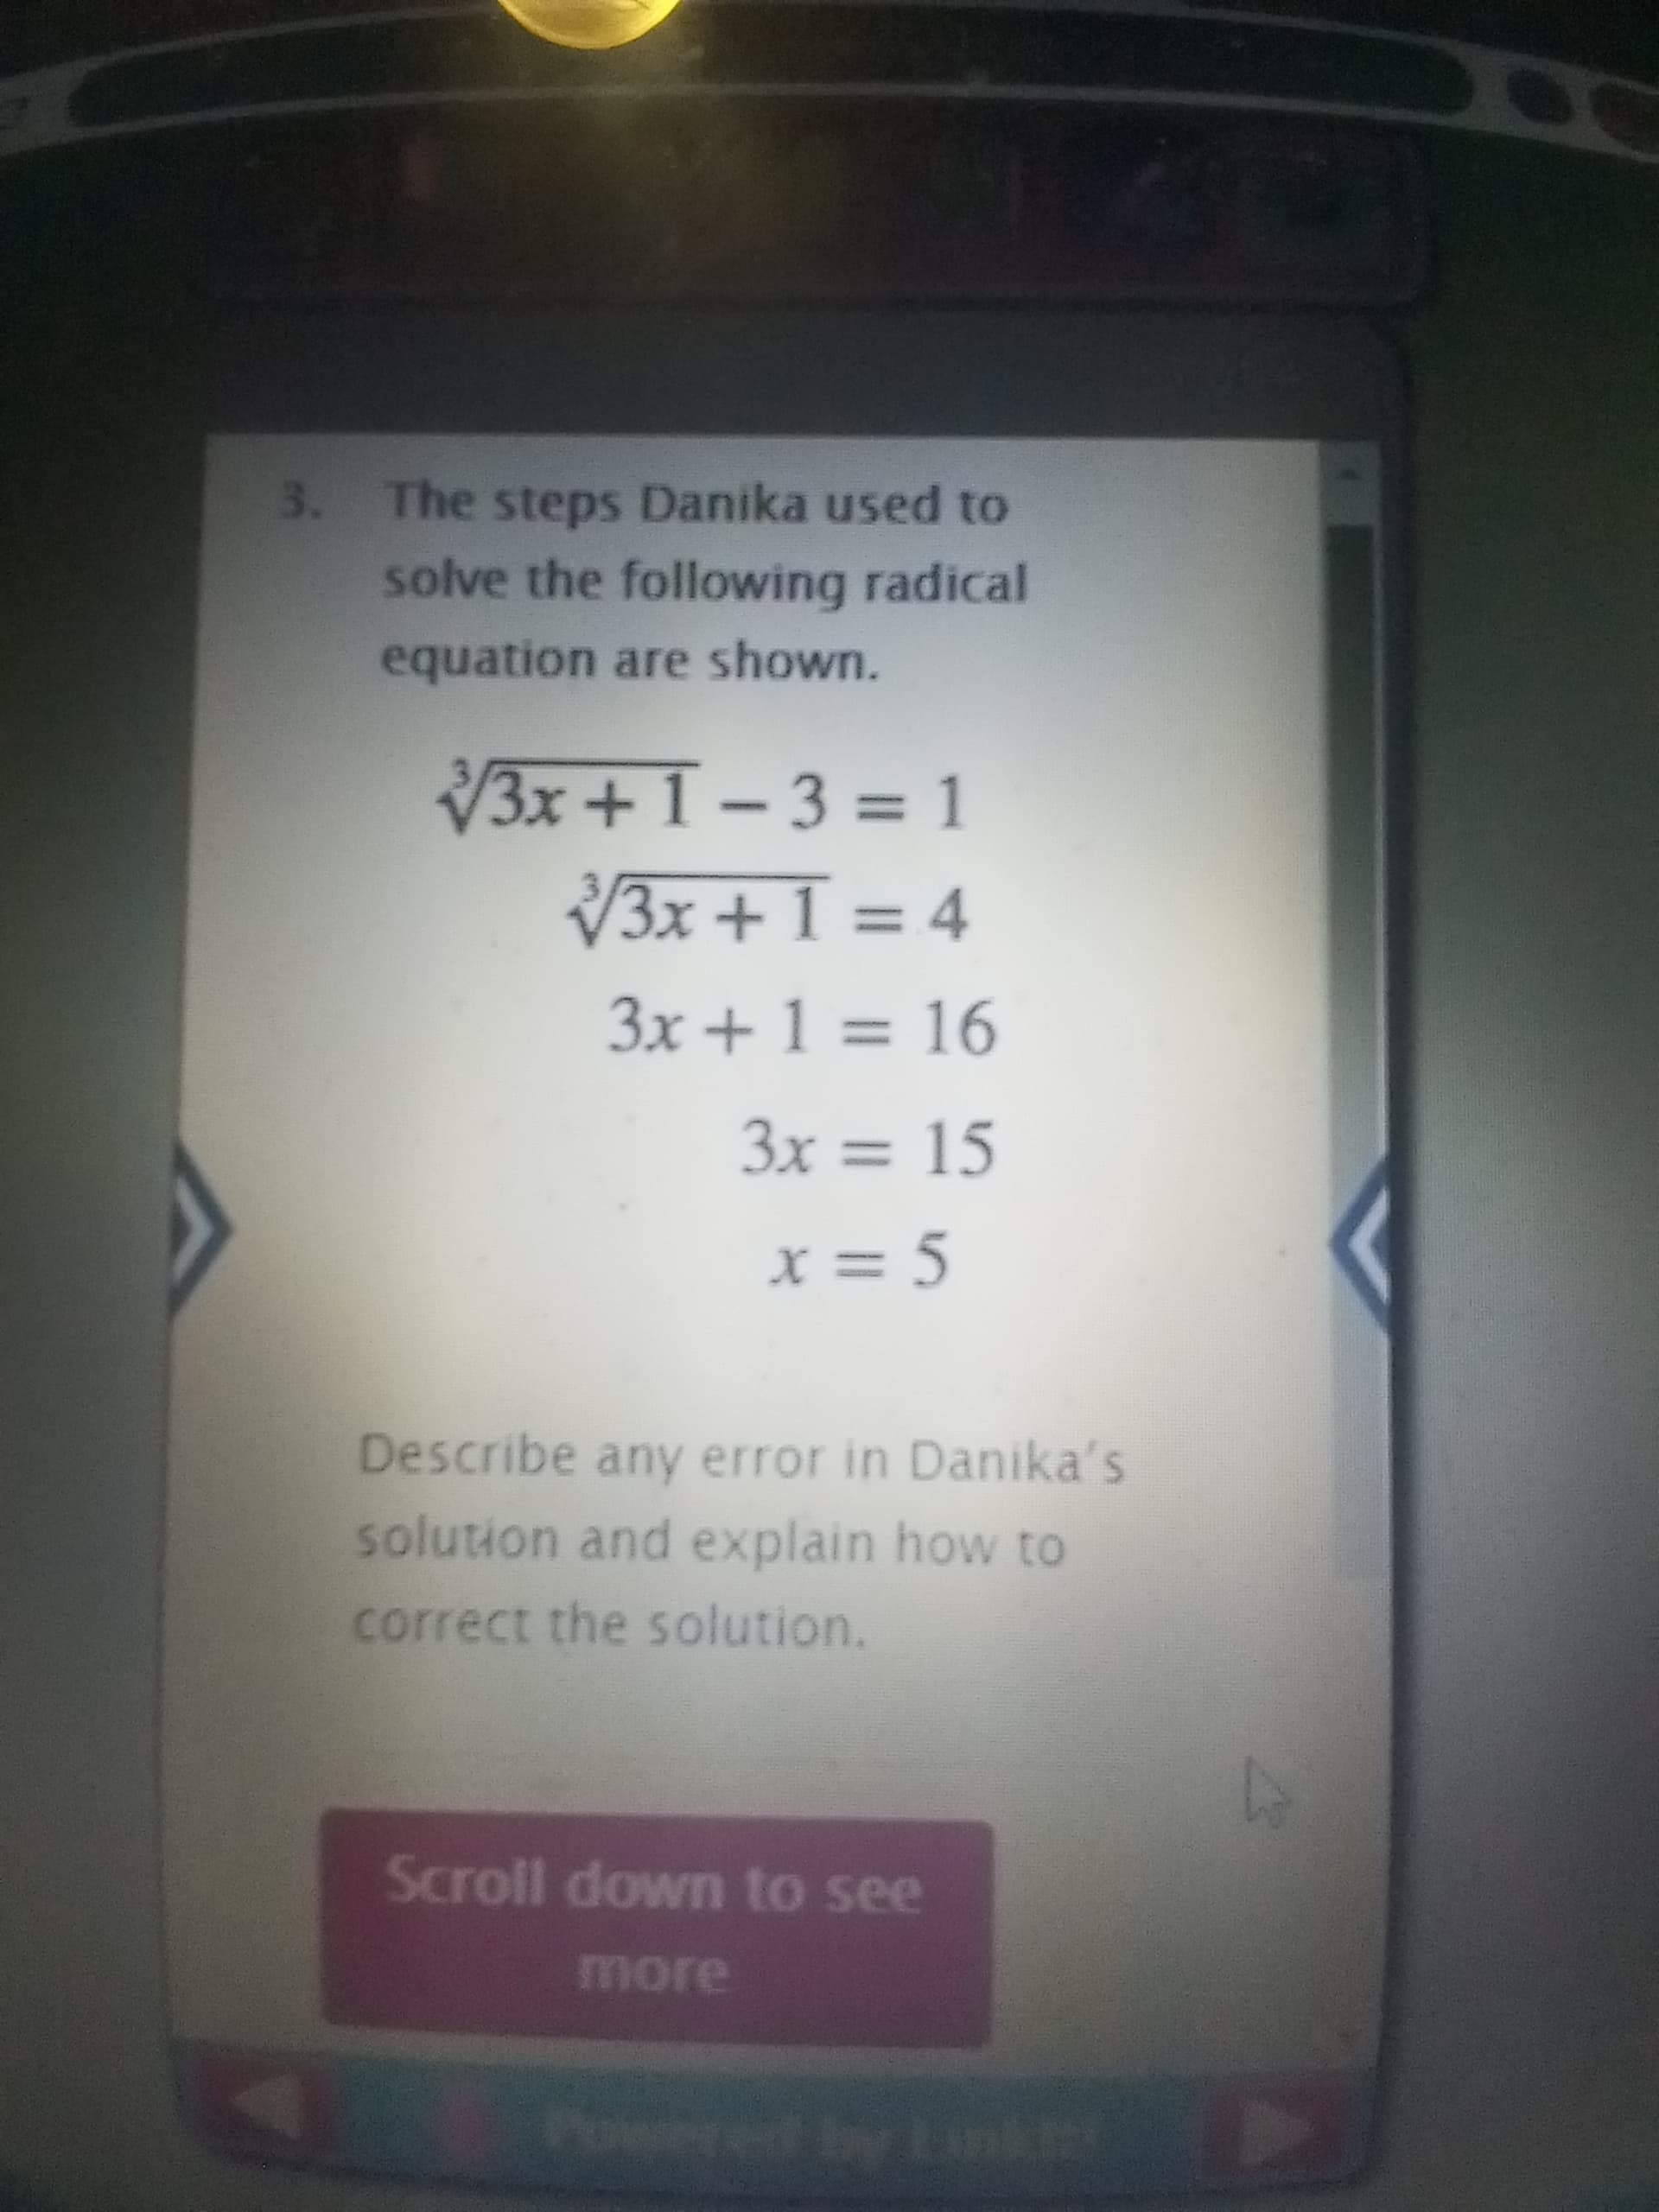 3. The steps Danika used to
solve the following radical
equation are shown.
3x+1-3 = 1
3x + 1 = 4
3x + 1 = 16
%3D
%3D
3x = 15
%3D
x = 5
Describe any error in Danika's
solution and explain how to
correct the solution.
